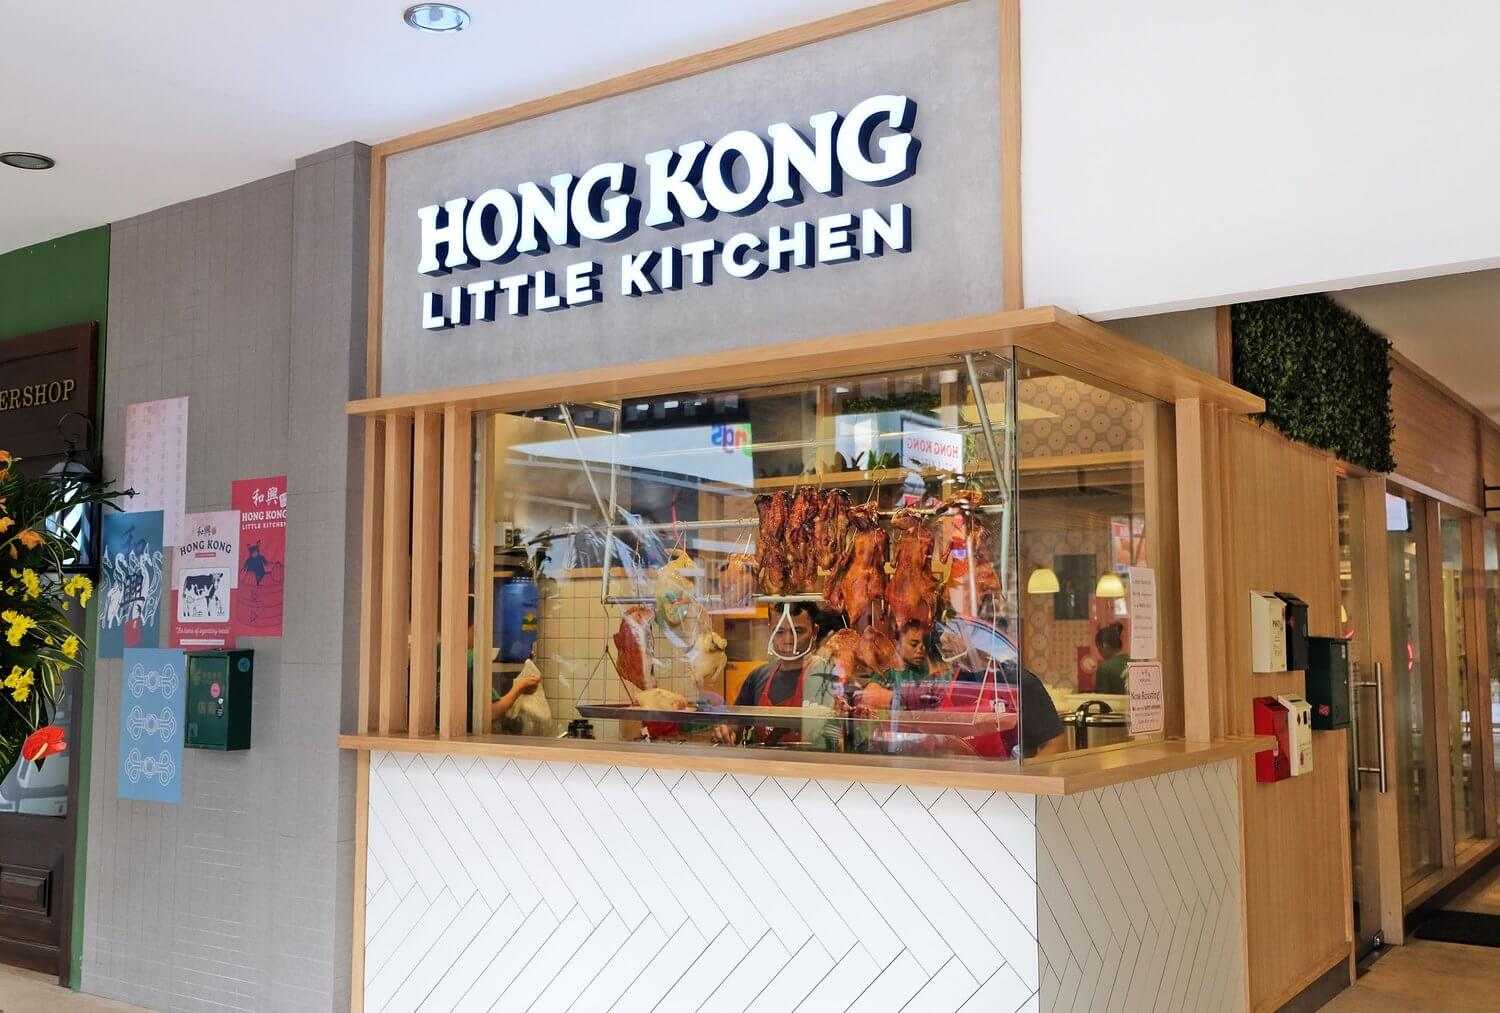 Store front environment design for food and beverage brand Hong Kong Little Kitchen